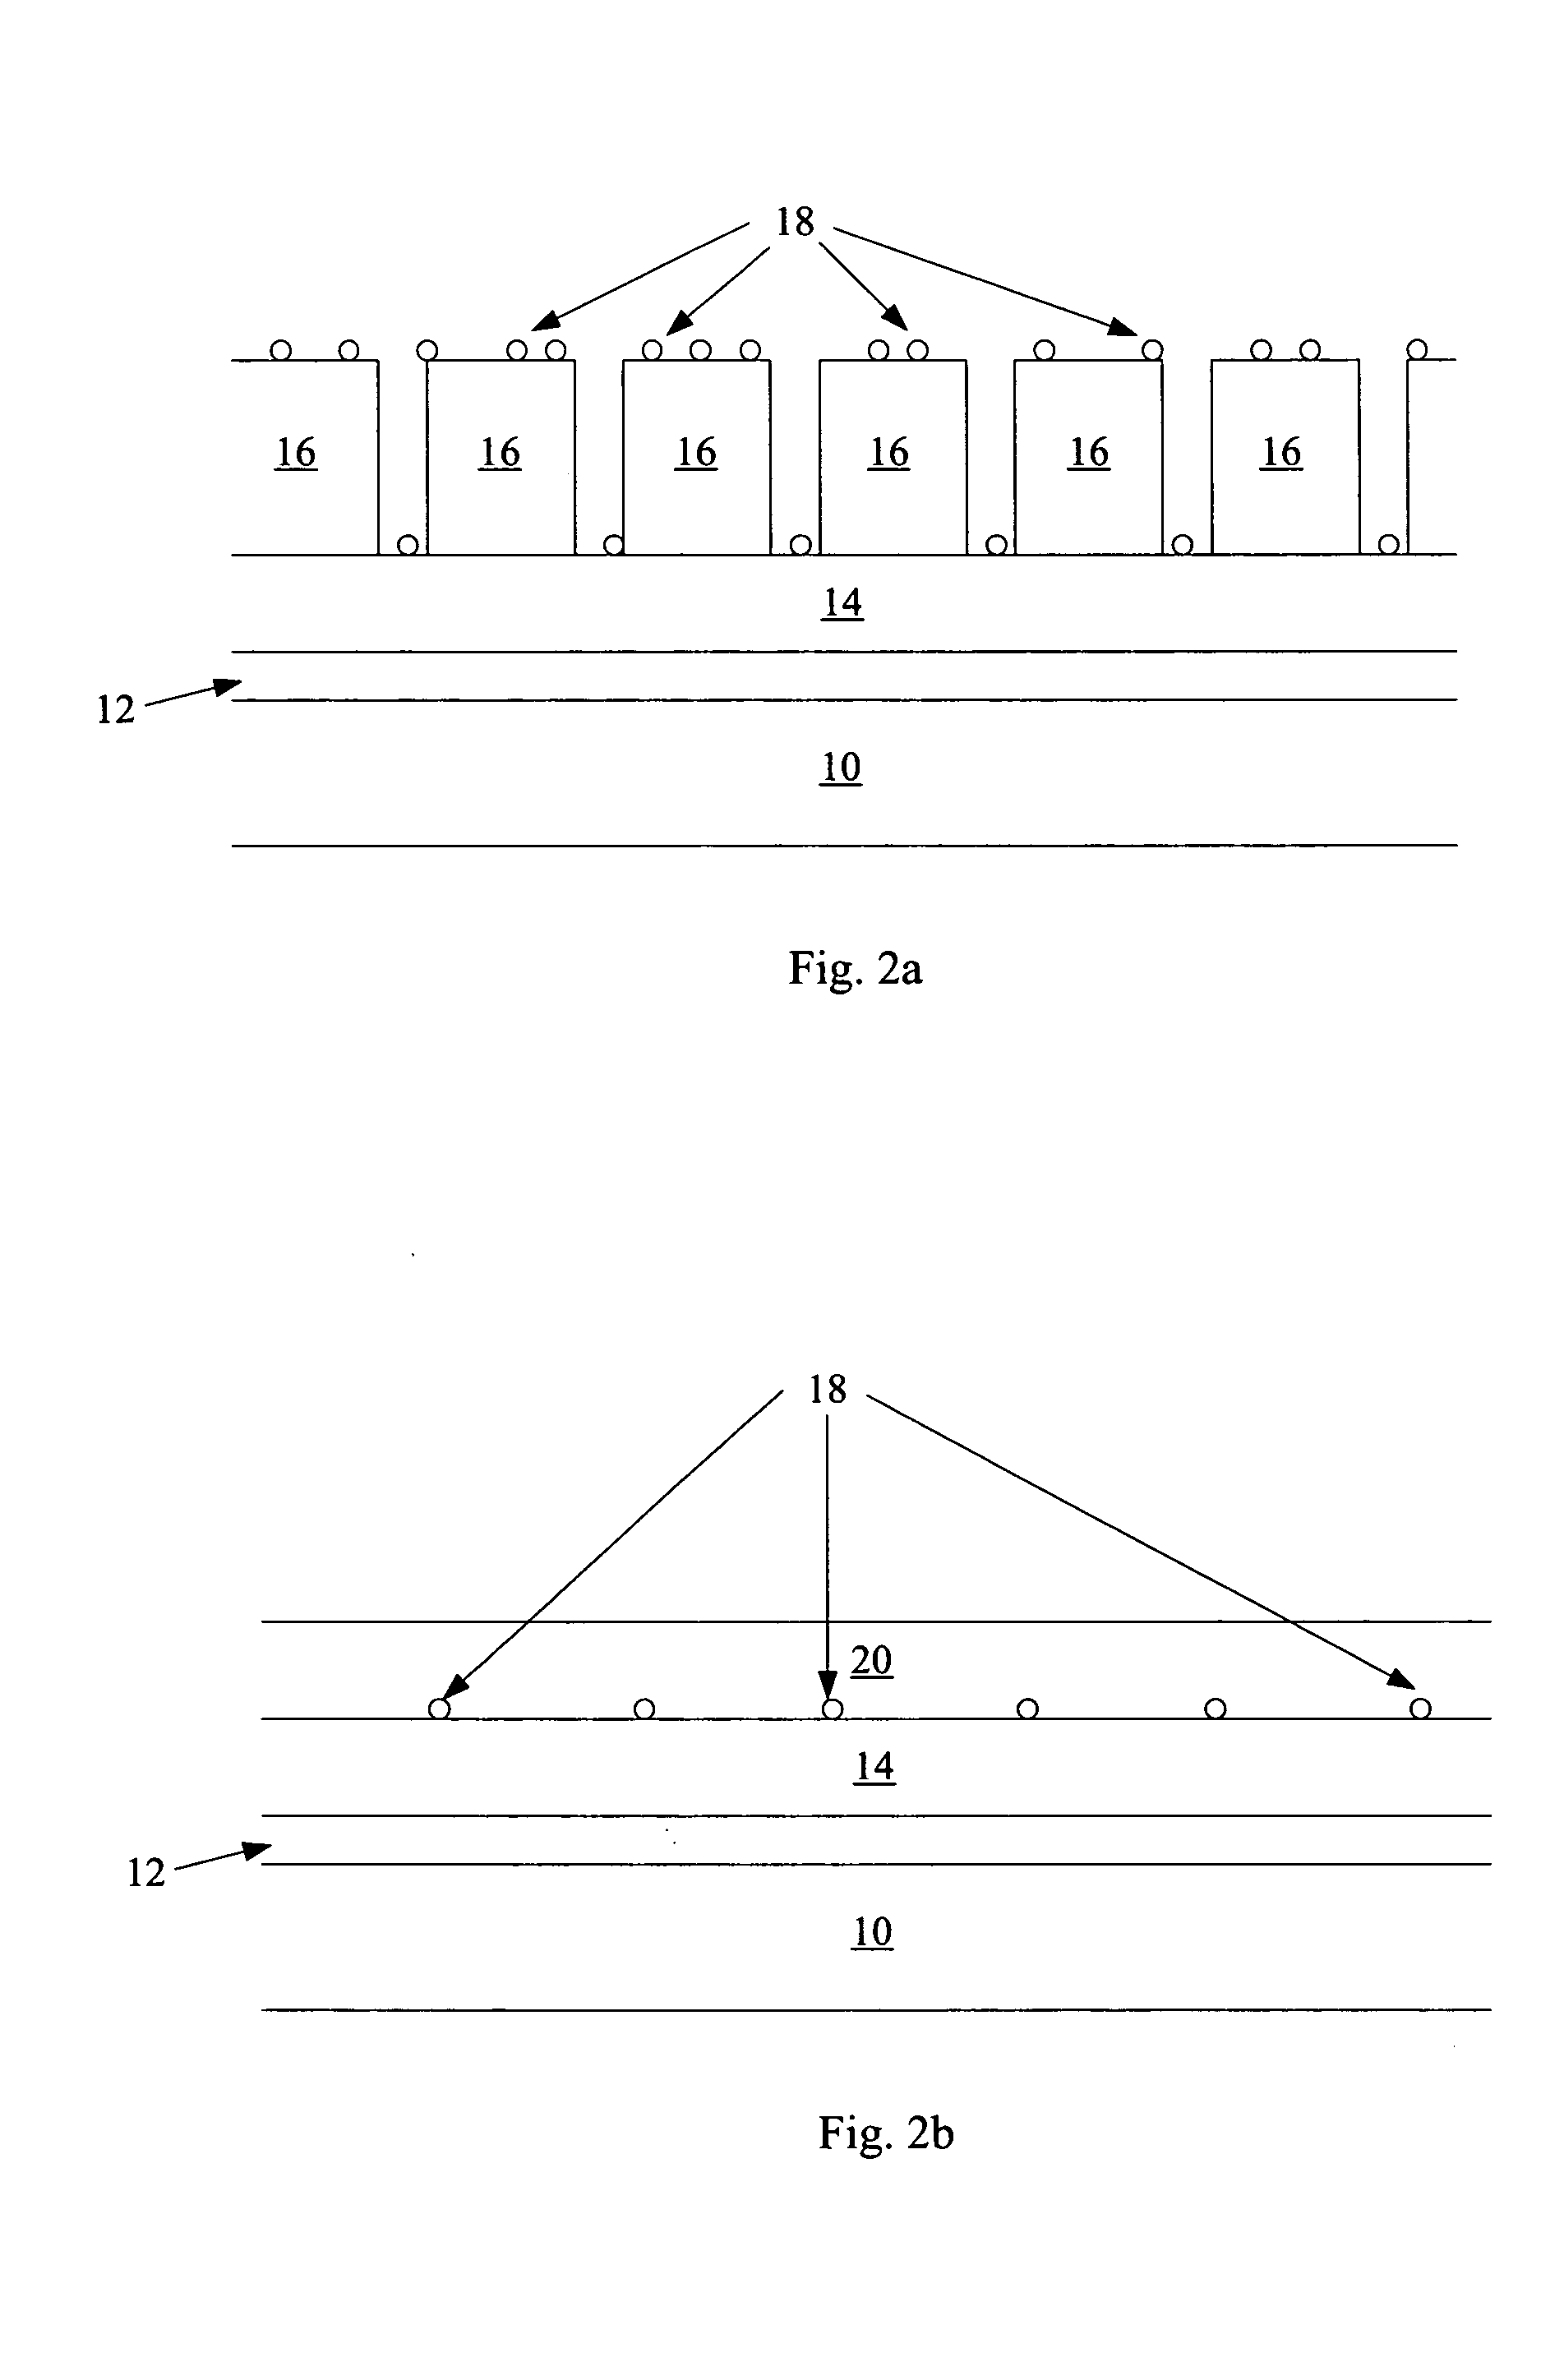 Uniform seeding to control grain and defect density of crystallized silicon for use in sub-micron thin film transistors